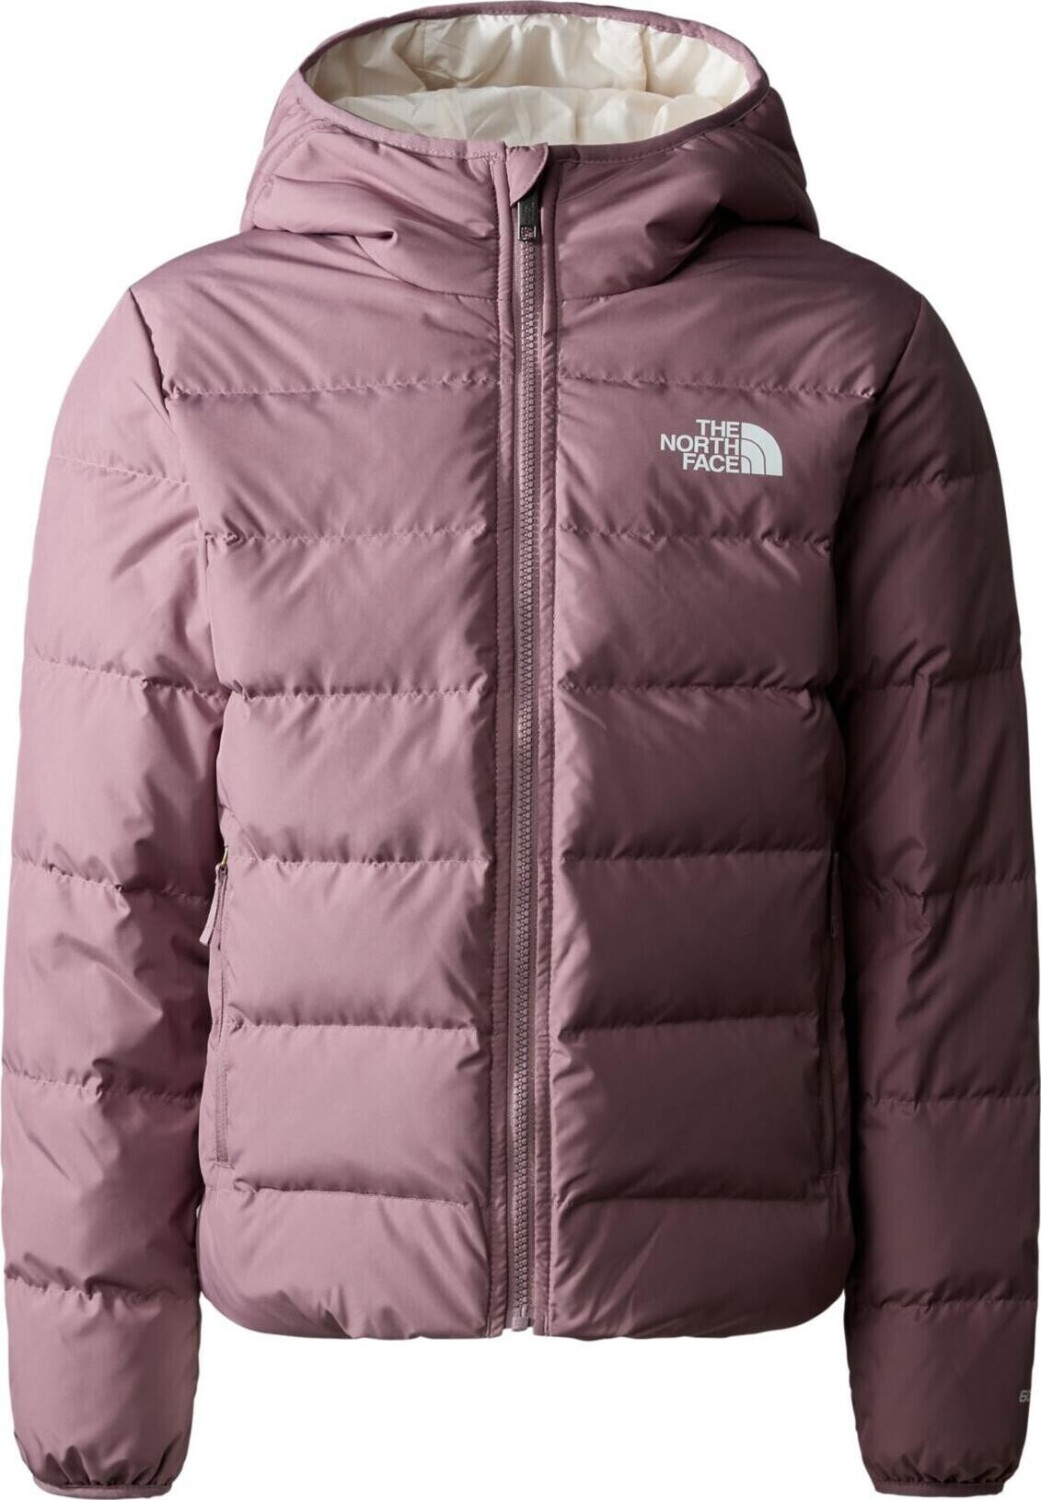 Buy The North Face Reversible Down Hooded Jacket Kids (84N6) from